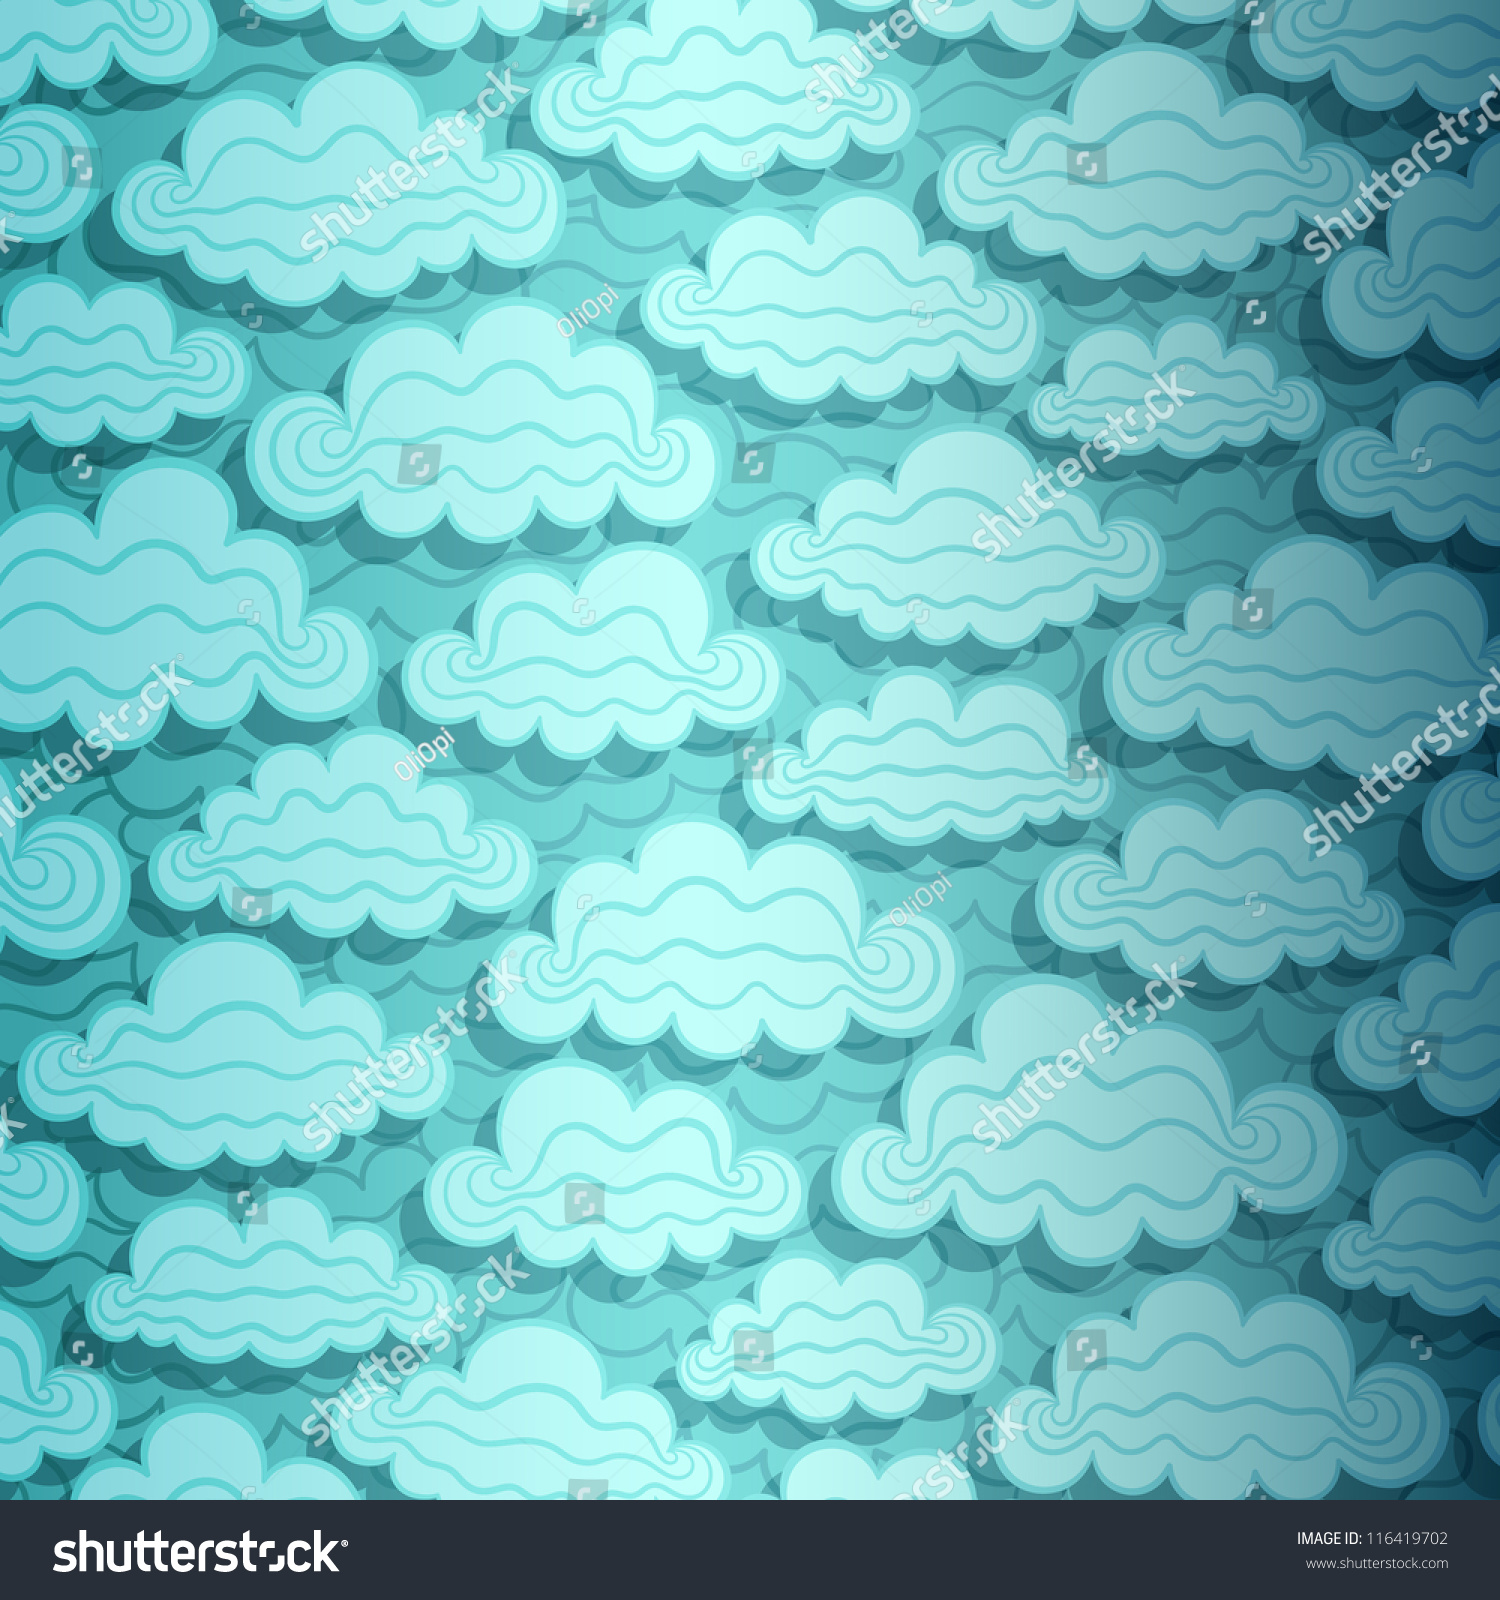 Cloudy Sky Banner Made Fancy Paper Stock Vector HD (Royalty Free ...